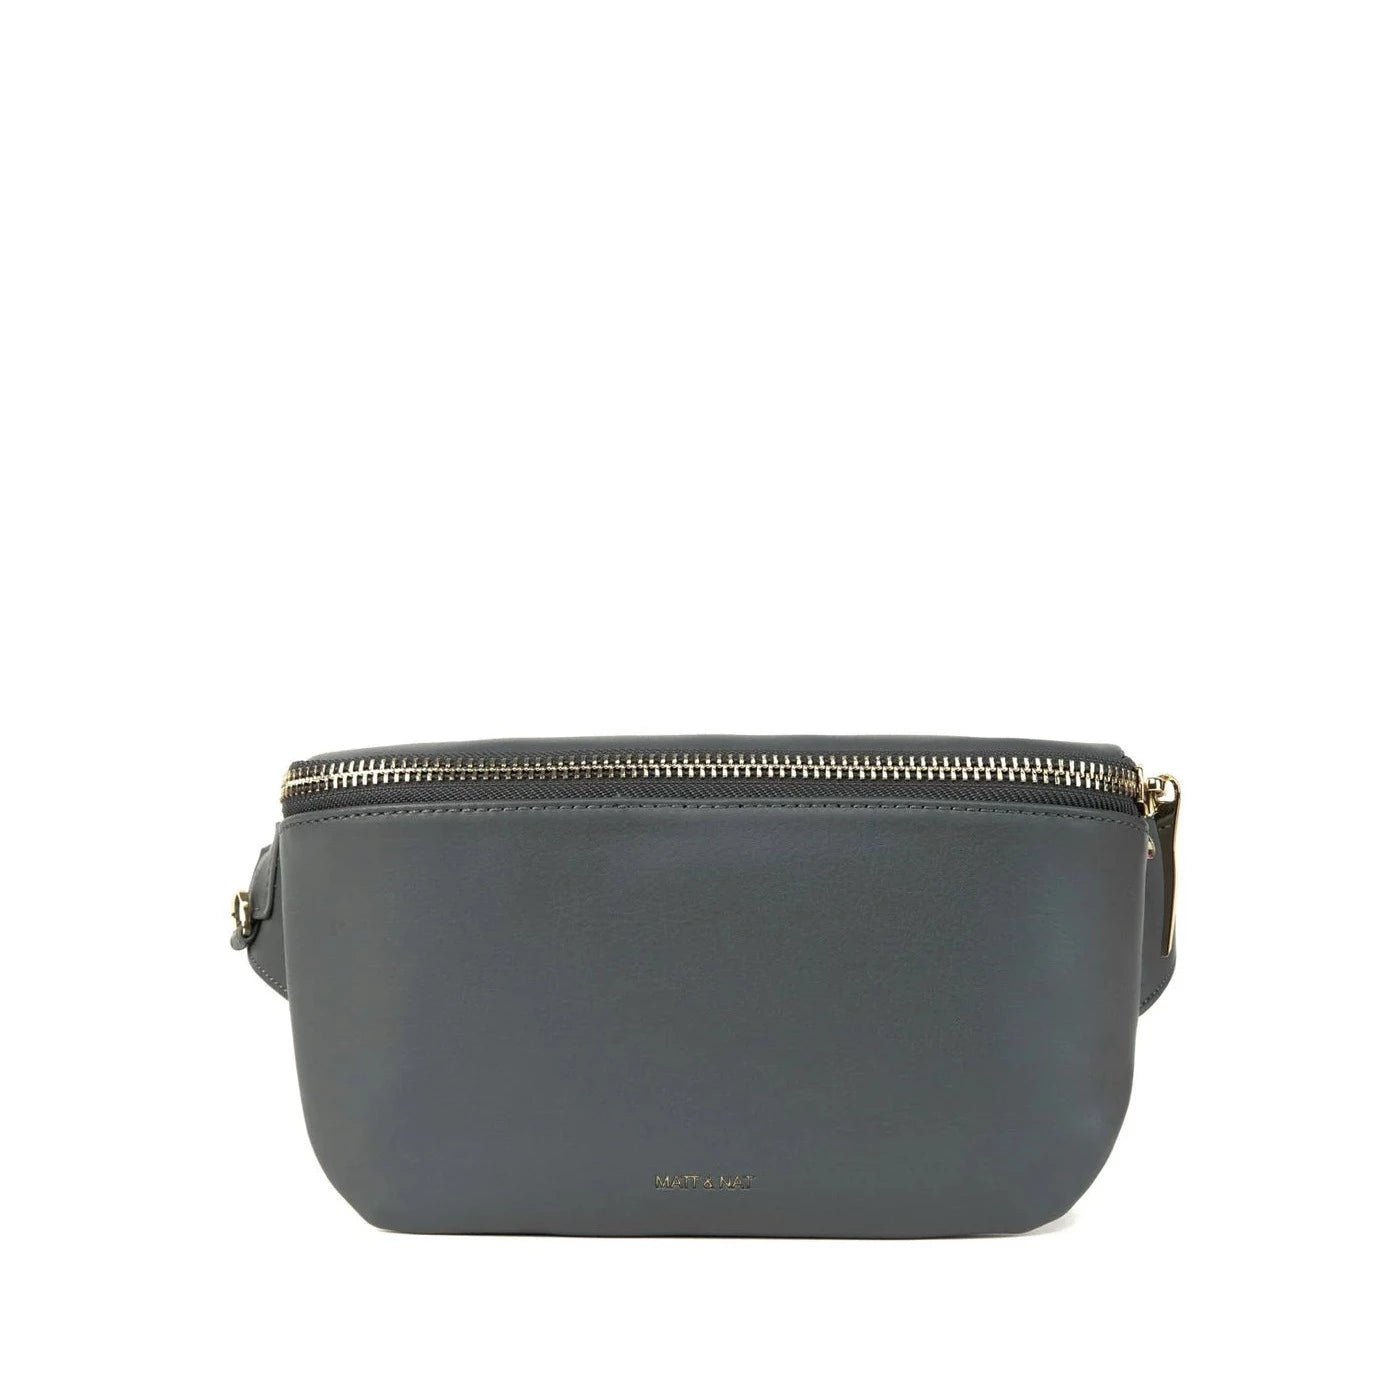 Matt & Nat Vie Fanny Pack, The Local Space, Local Canadian Brands